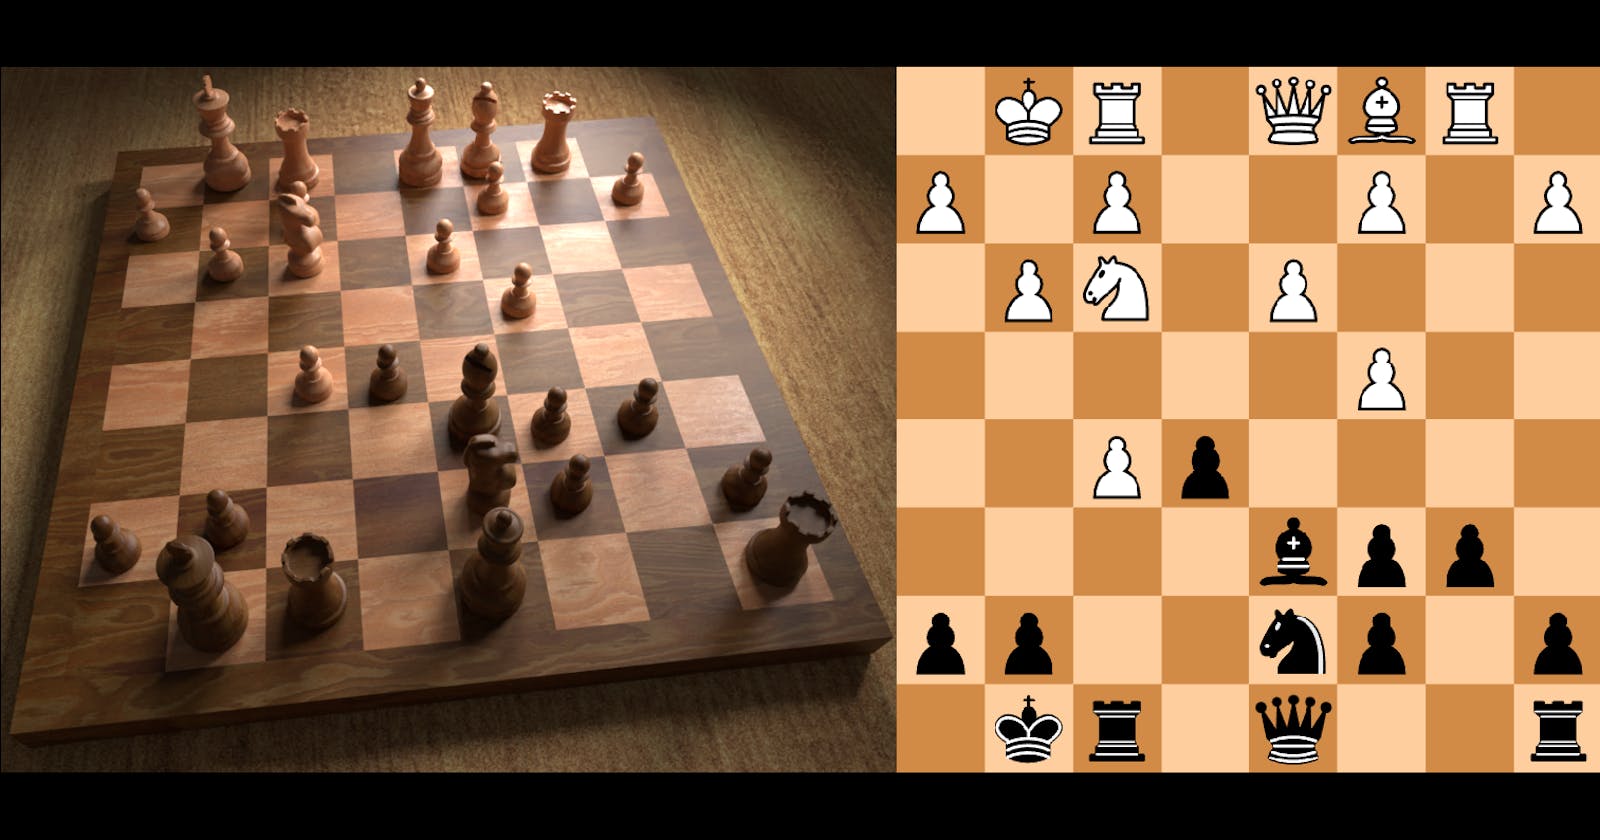 Recognizing Chess Game State from an Image